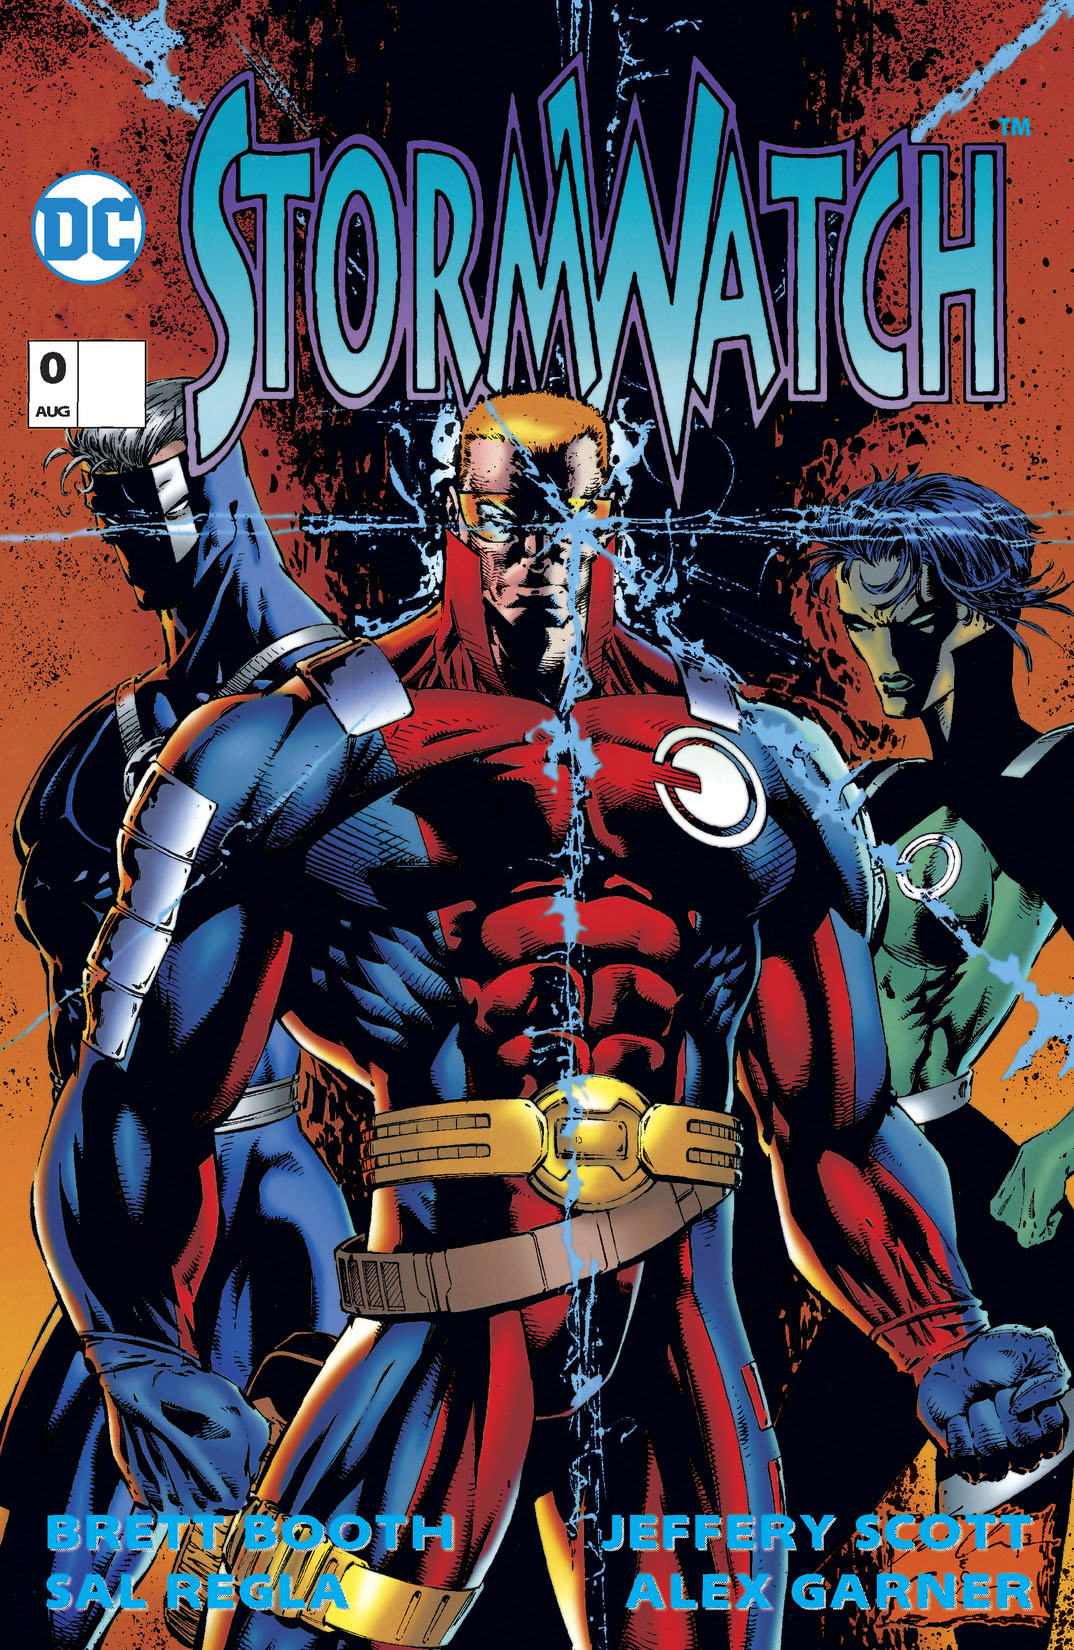 Stormwatch (1993-1997) #0 preview images